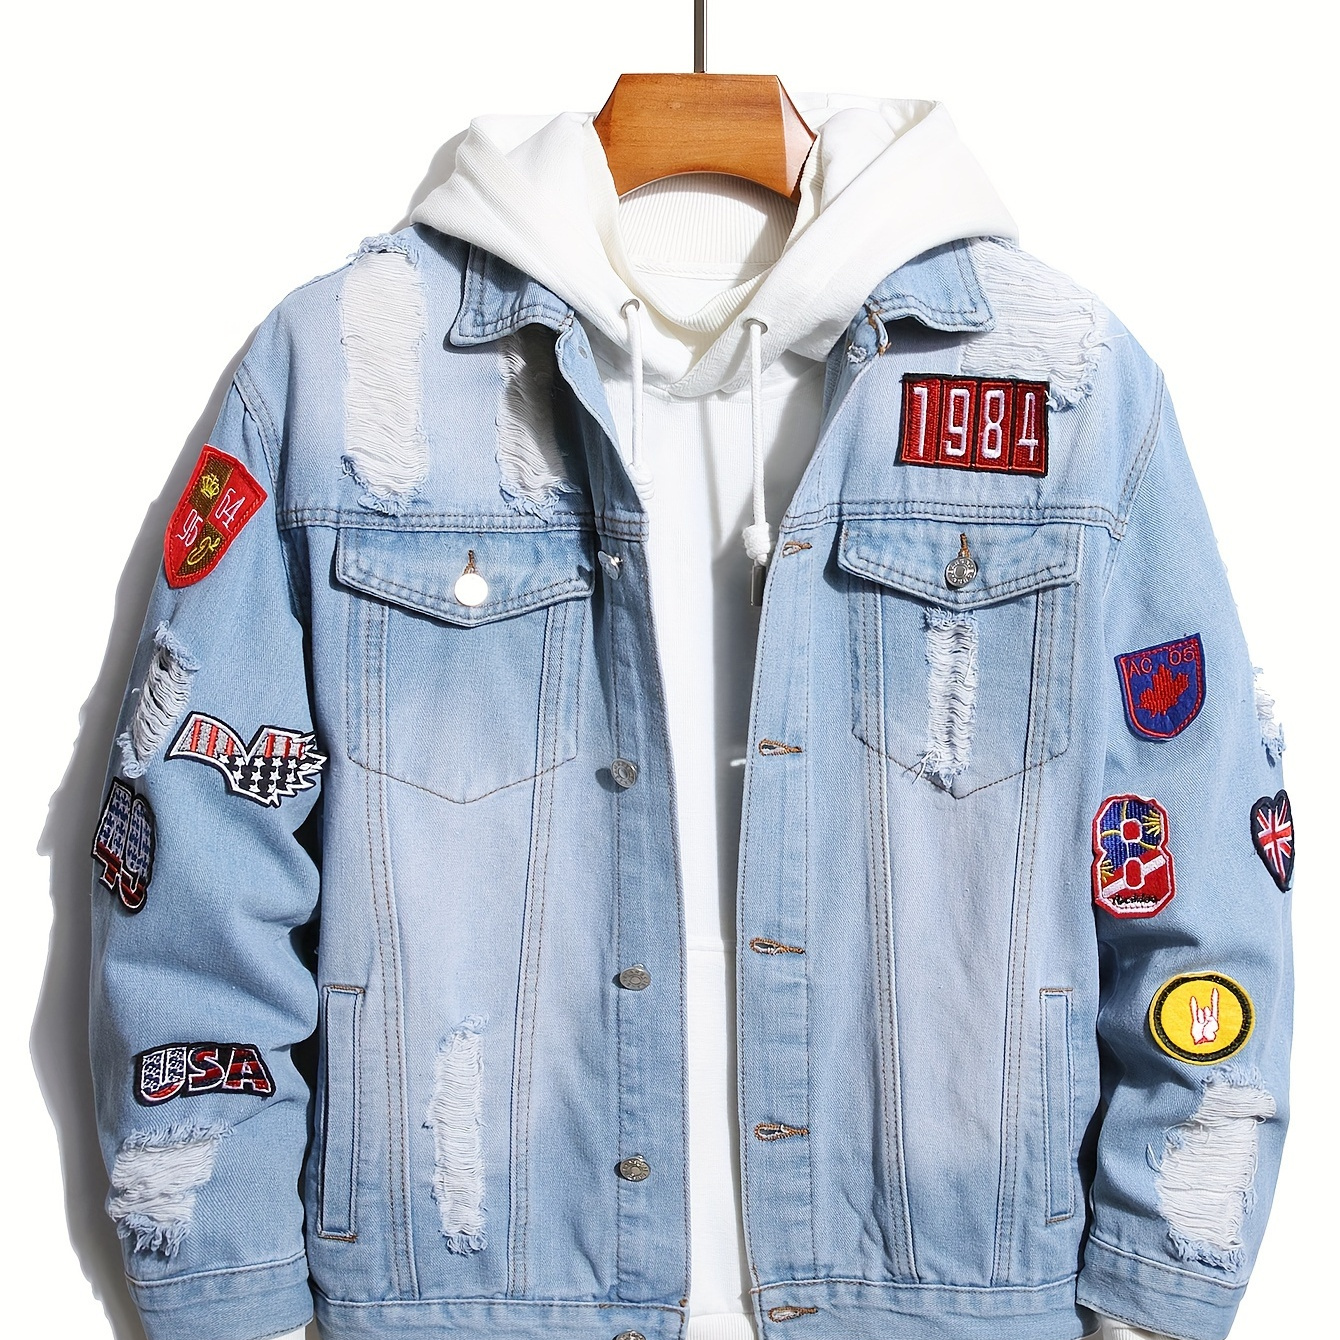 

Men's Casual Patchwork Ripped Denim Jacket, Chic Street Style Jacket